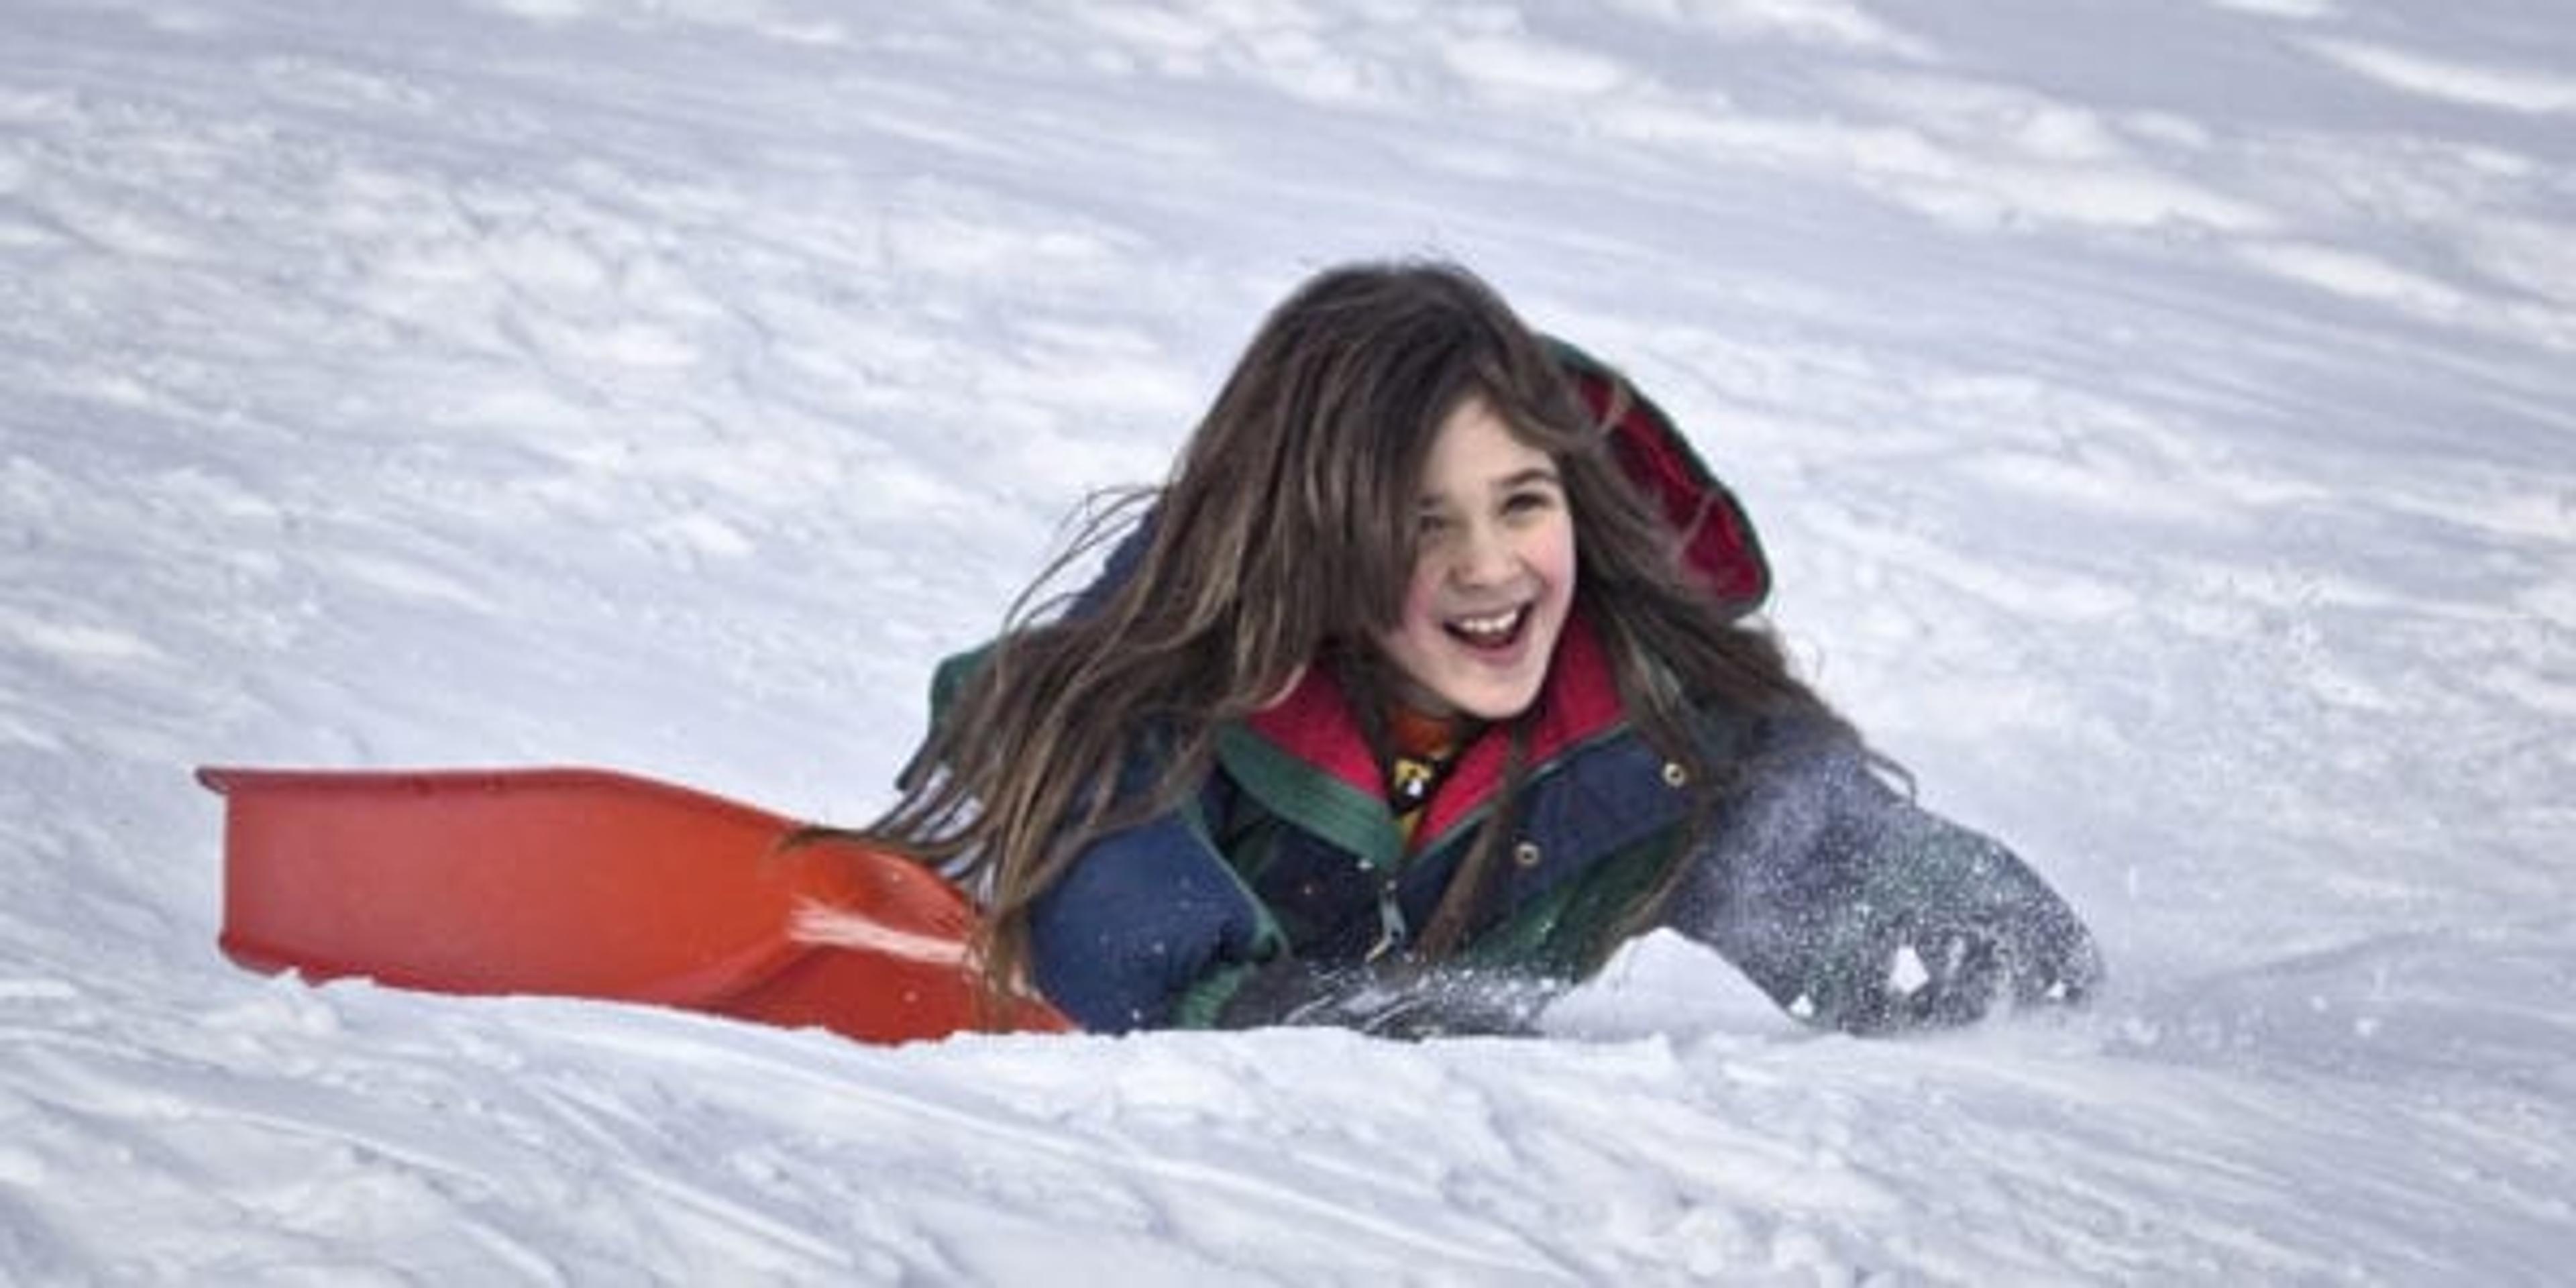 Little girl smiling while she sleds down a snow hill